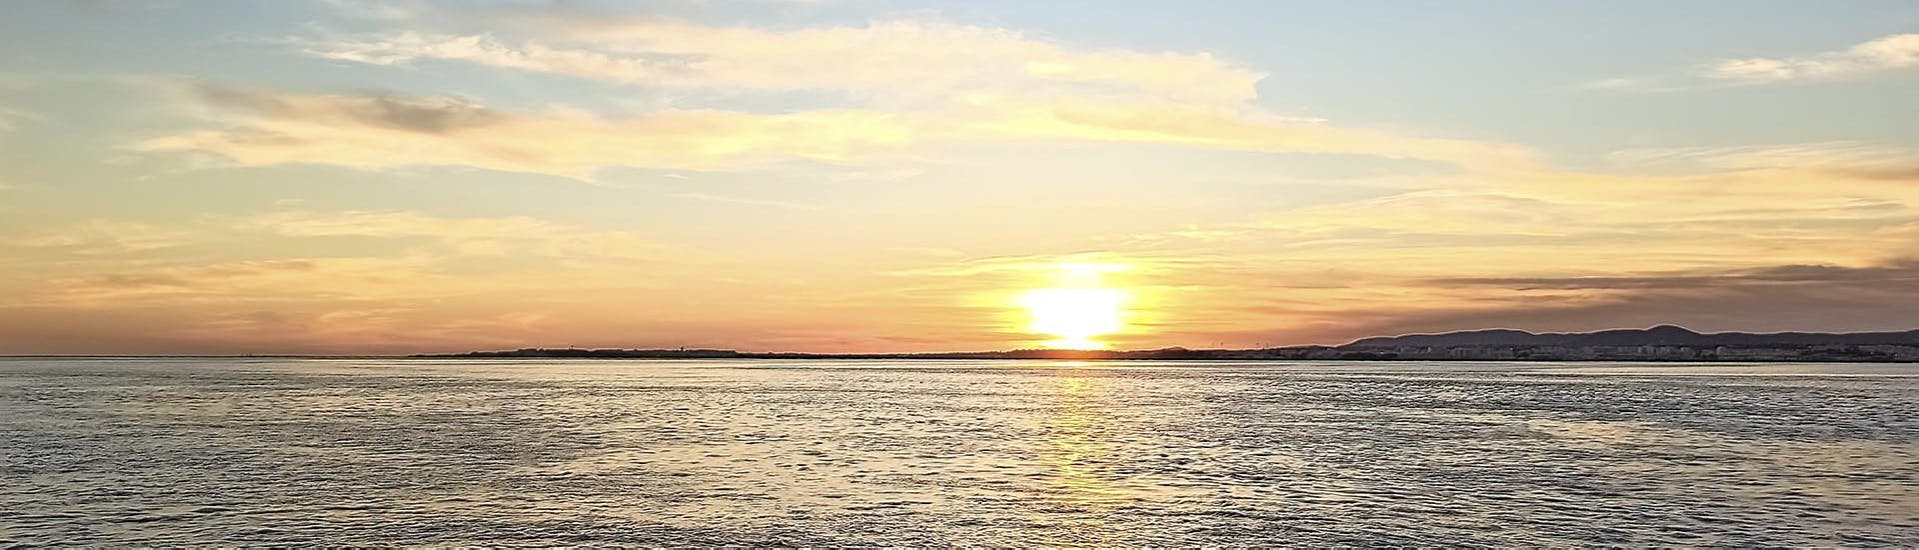 The sunset during the Sunset Boat Trip to Ria Formosa Natural Park of Islands 4 You.